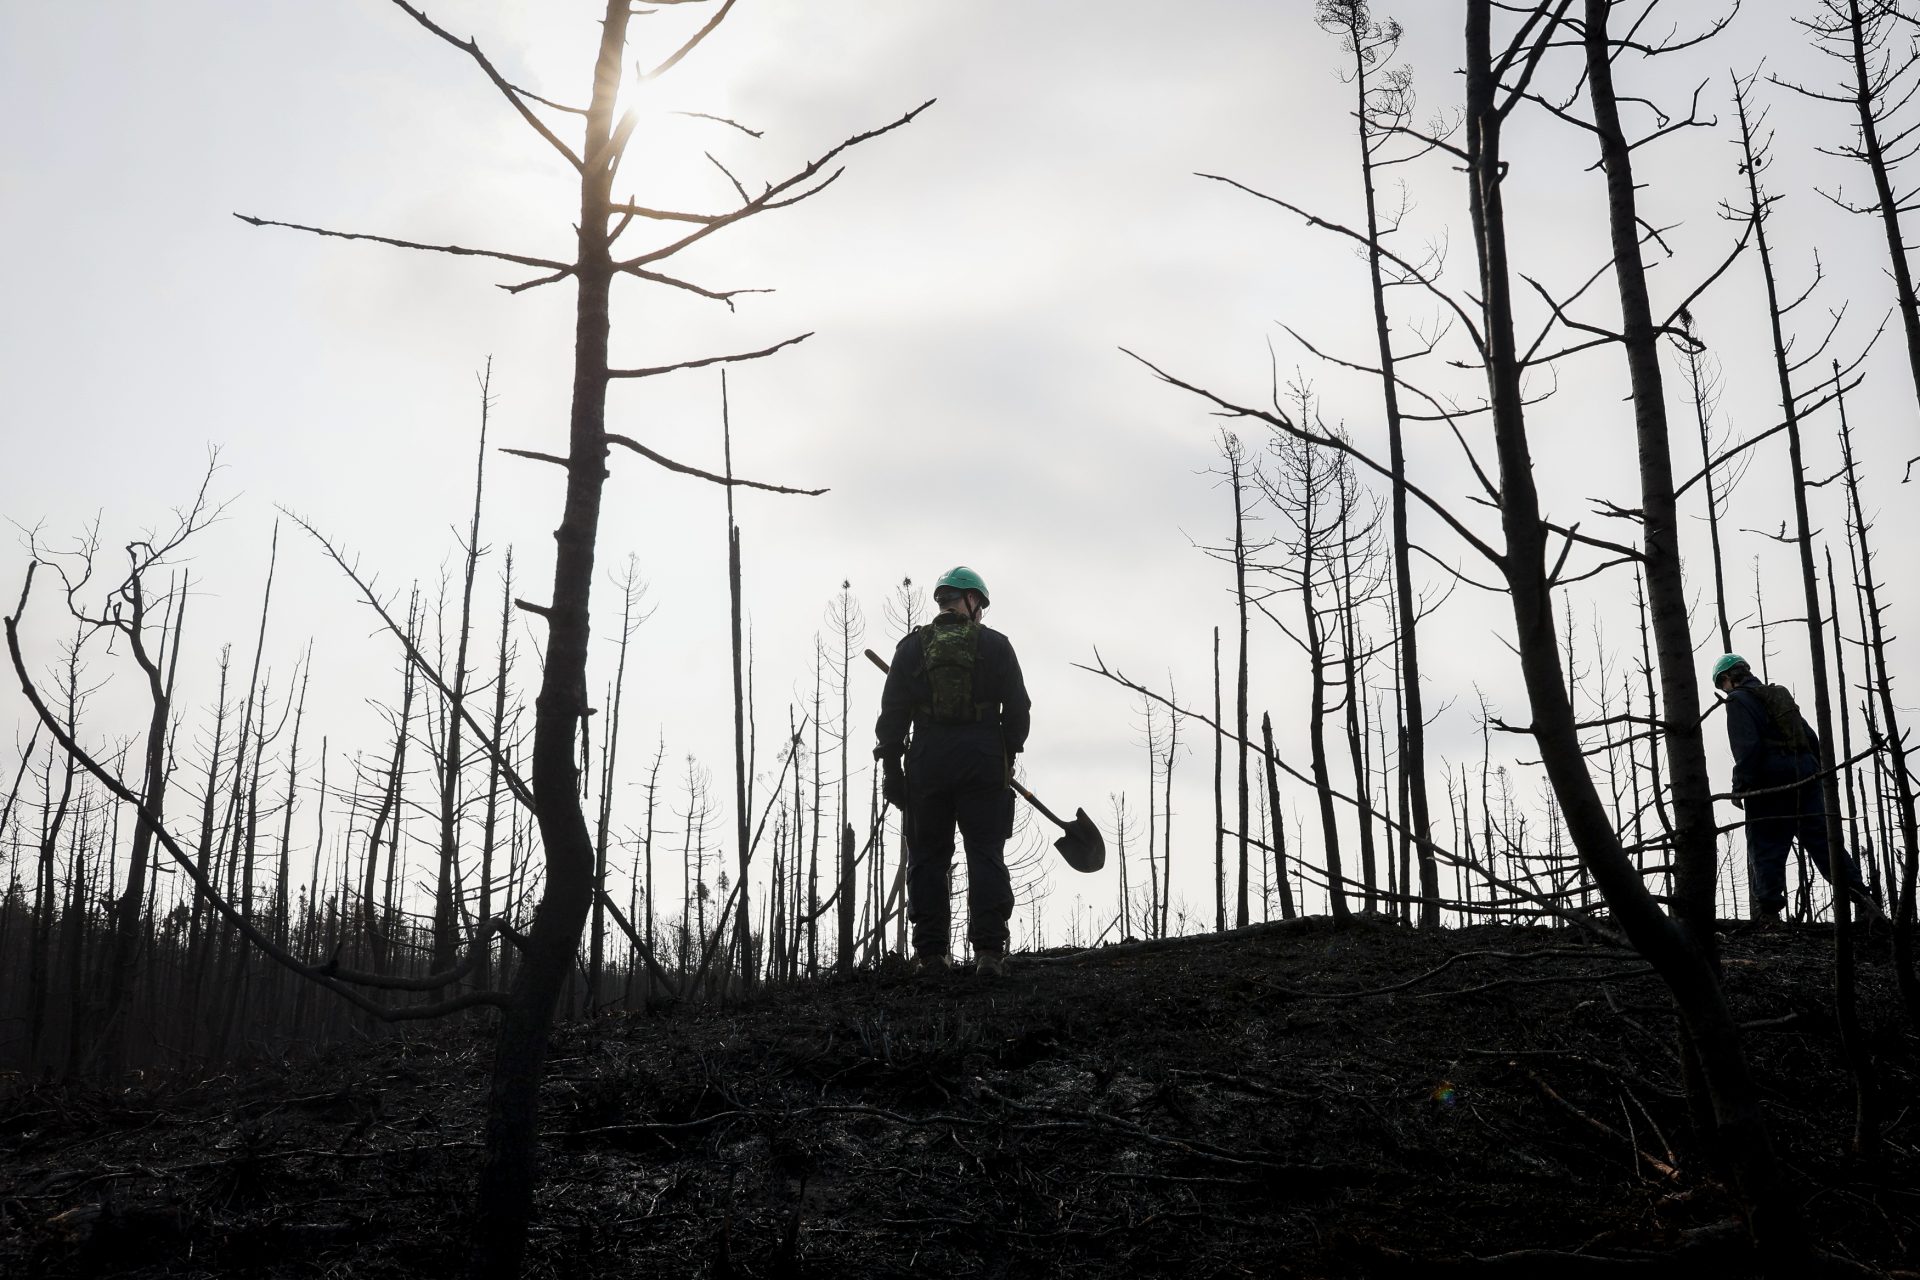 Canada is living through a record-breaking fire season